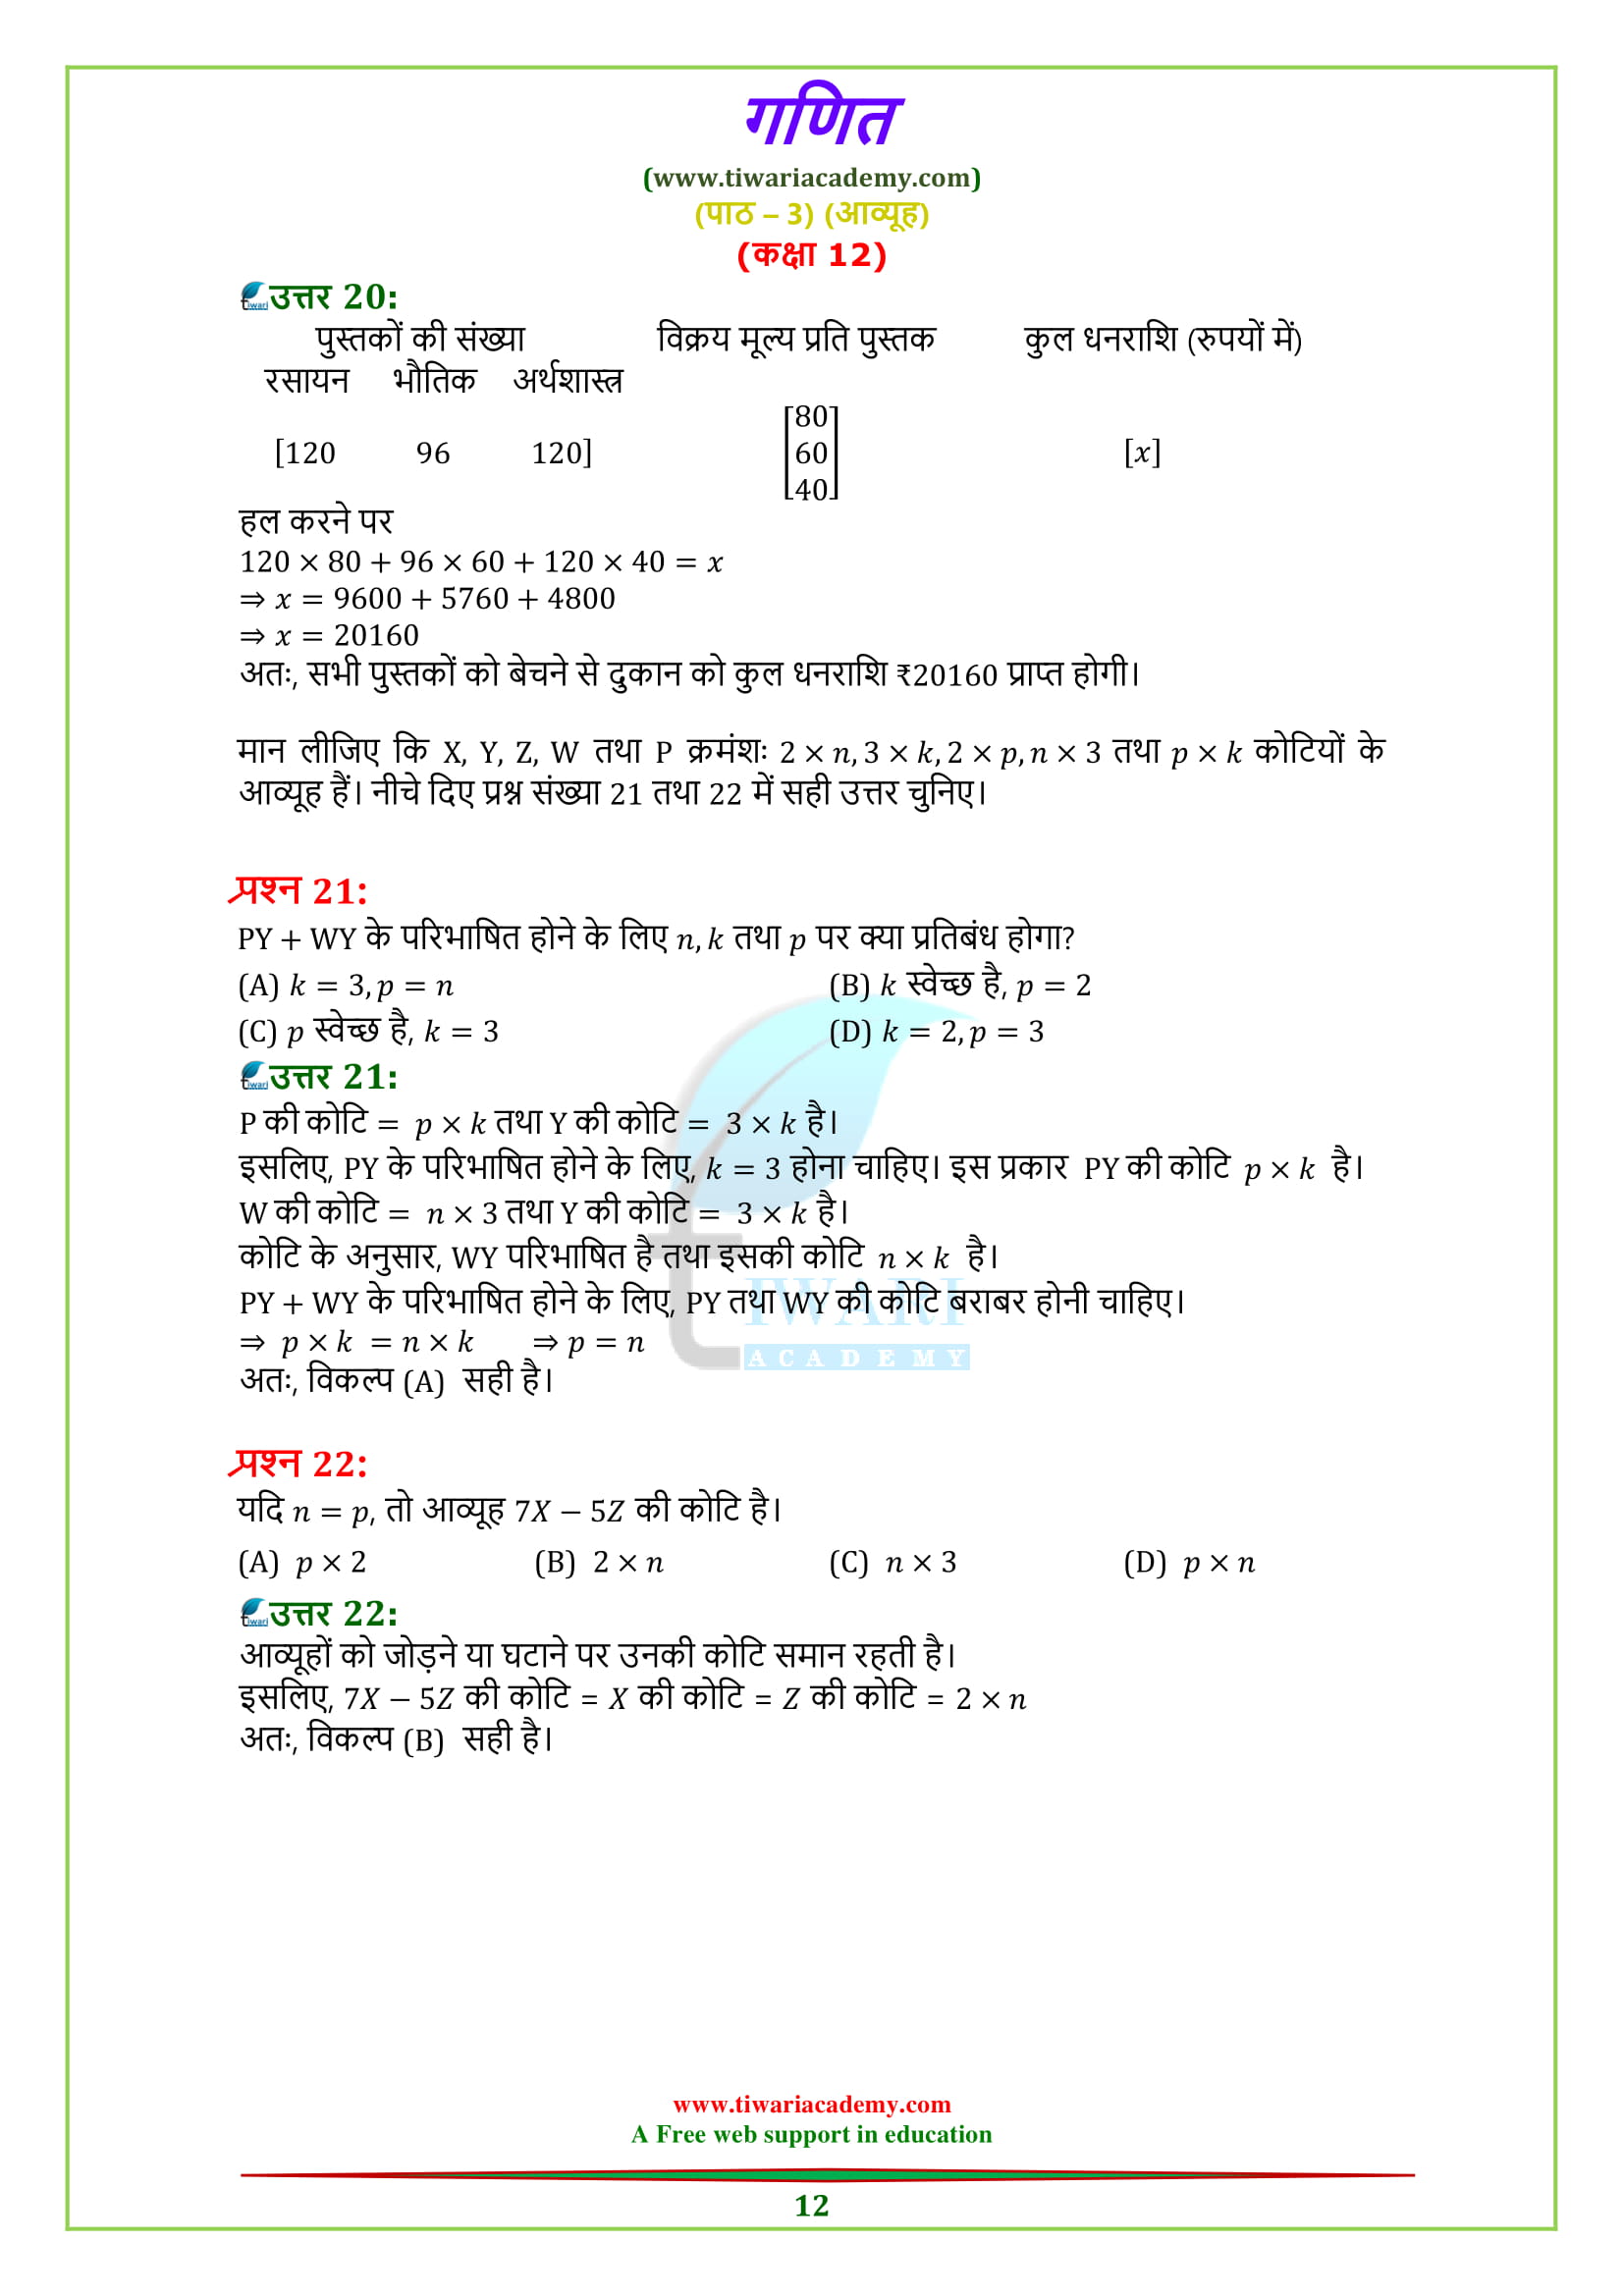 12 Maths Chapter 3 Exercise 3.2 Question-Answers in Hindi medium